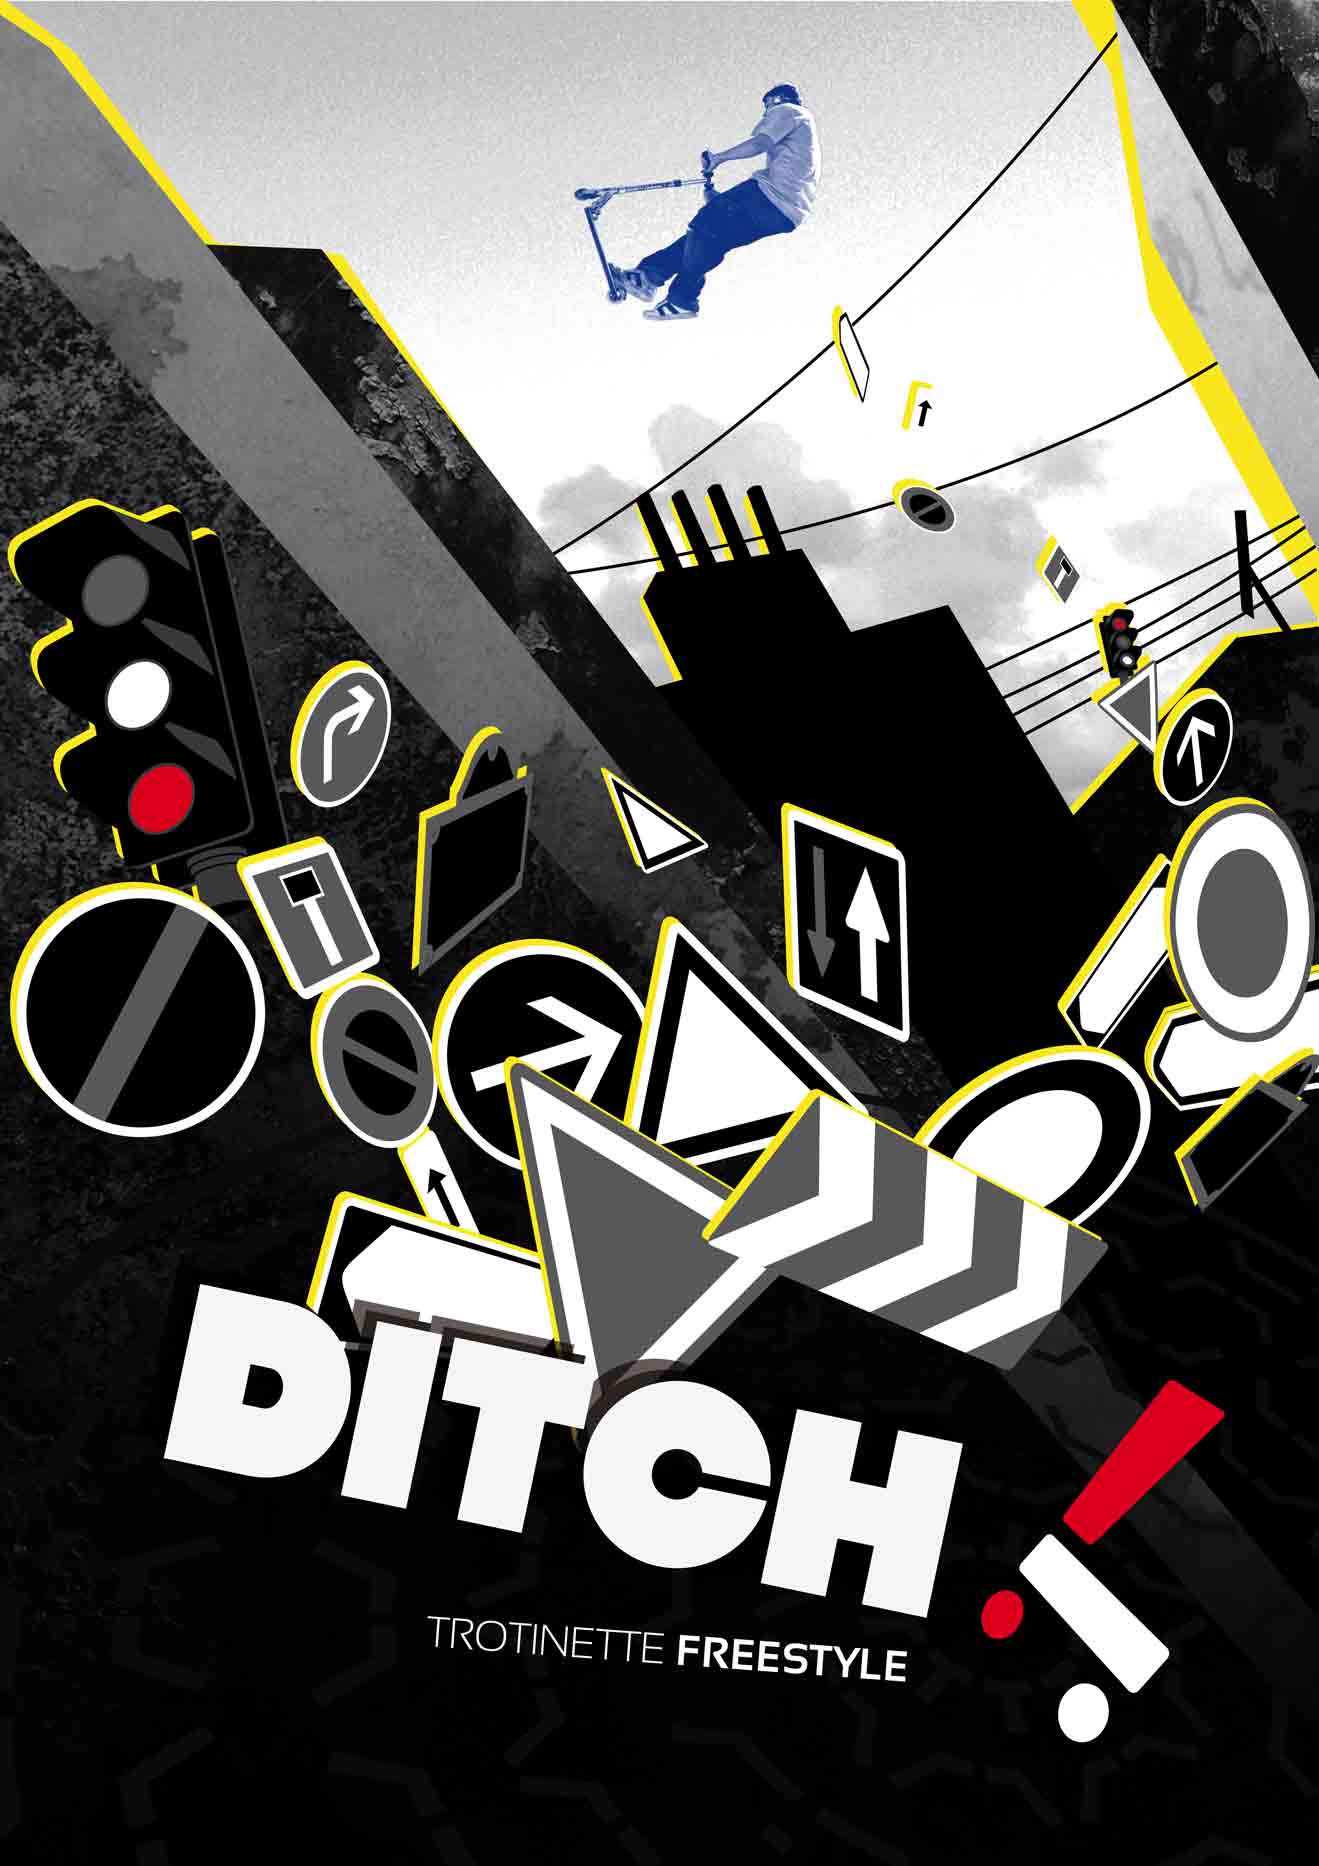 Poster for a school assignment handled over by the actual freestyle scooter brand "Ditch".